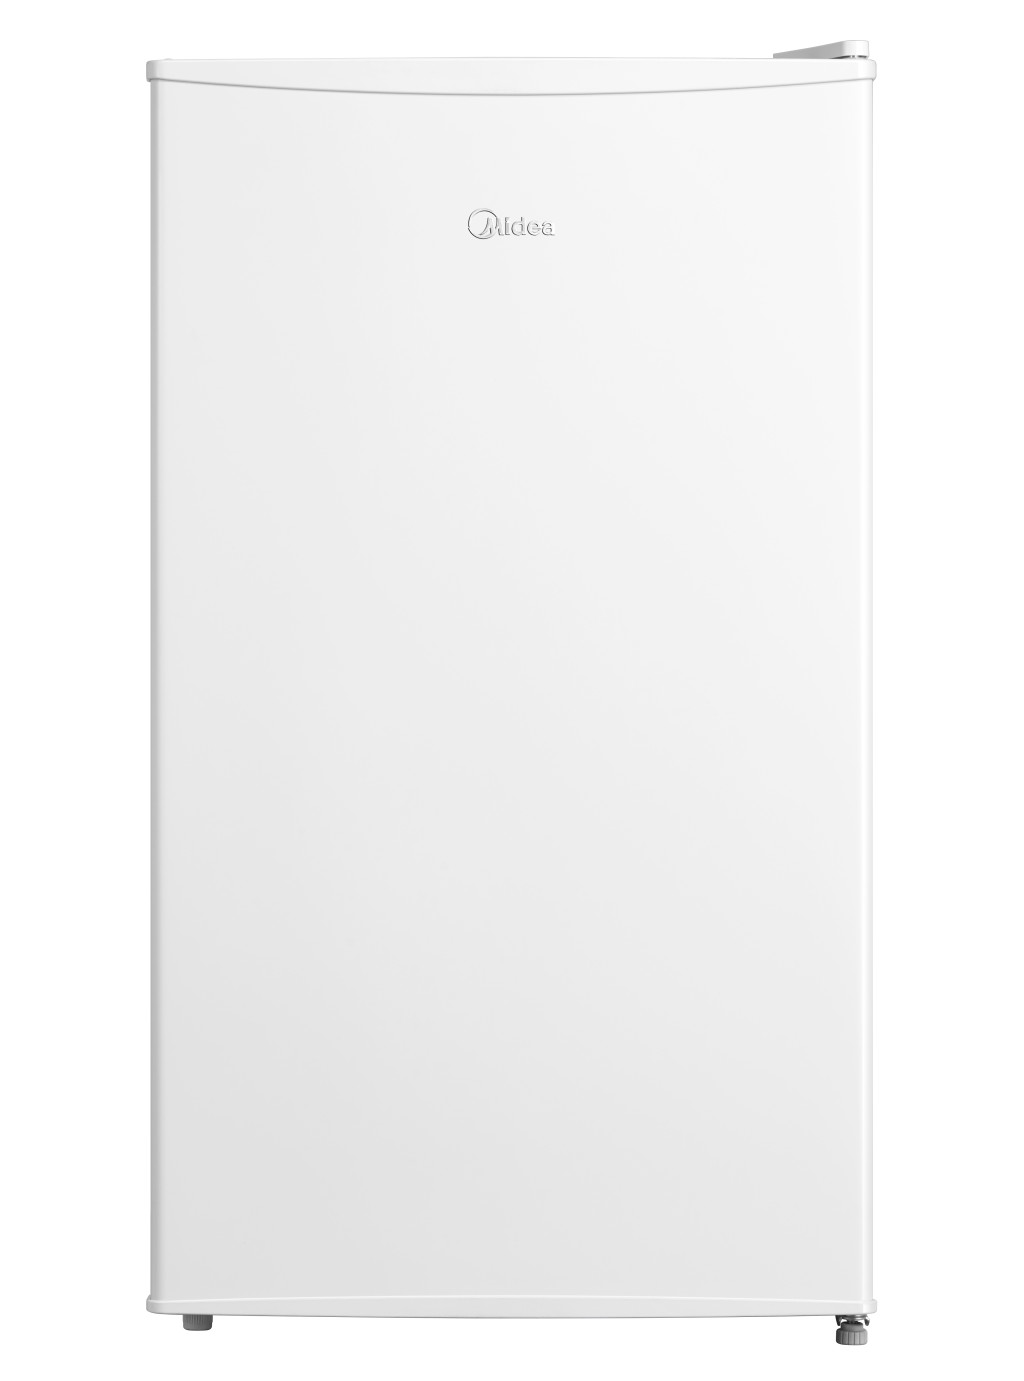 Midea Freezer | MDRD99FZE01 | Energy efficiency class E | Upright | Free standing | Height 84.5 cm | Total net capacity 60 L | White